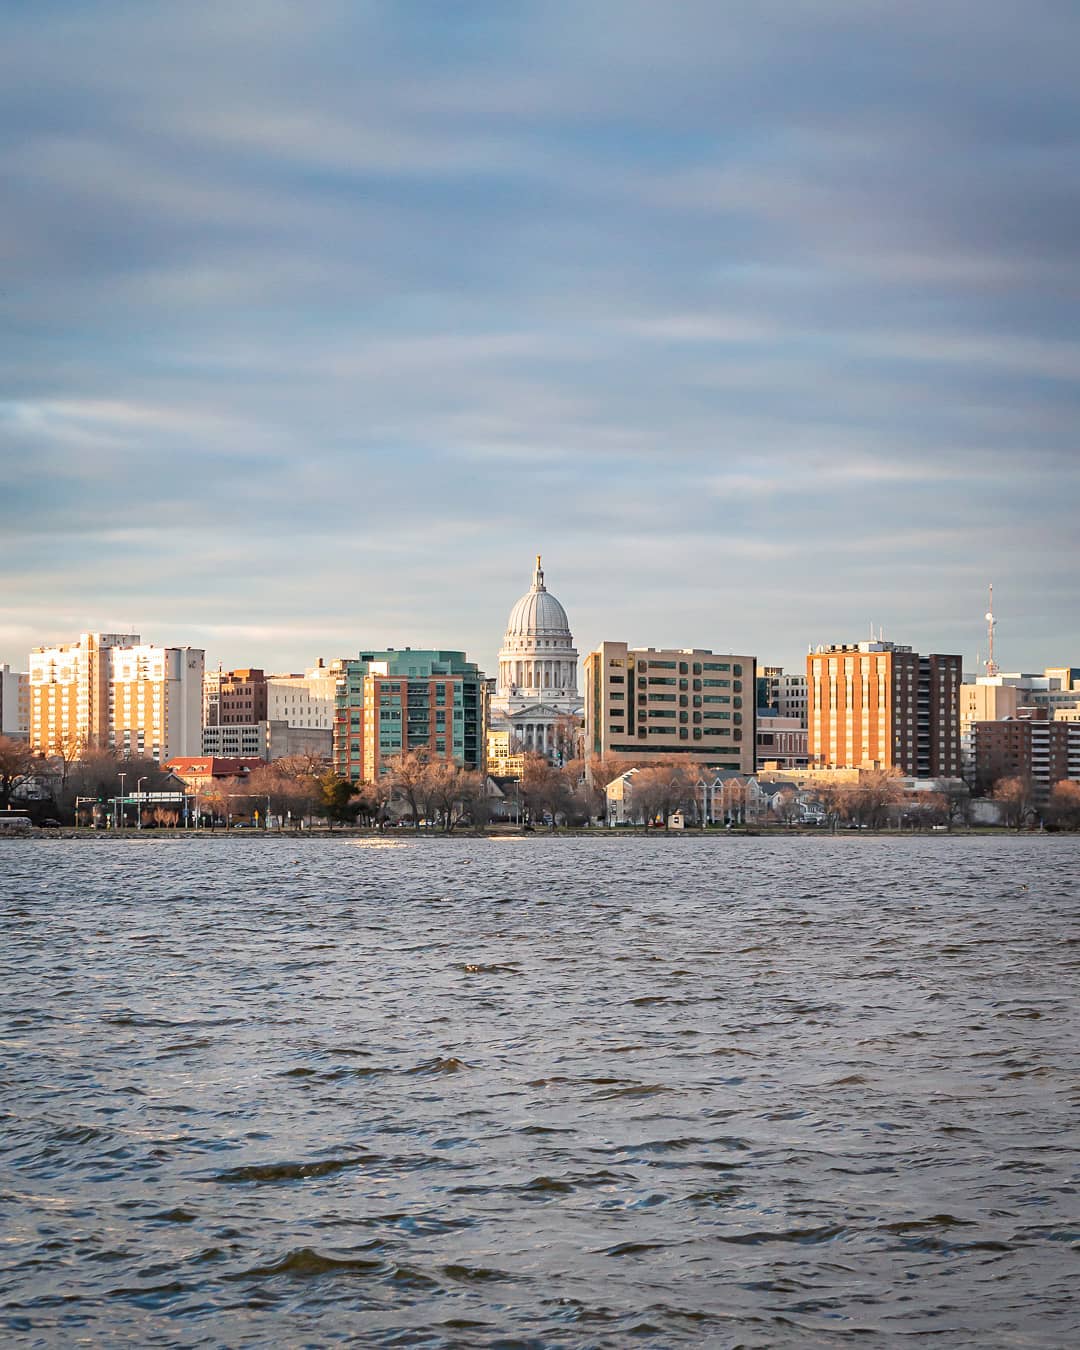 View of the Wisconsin State Capitol Building in Madison, WI Looking Across Lake Monona. Photo by Instagram user @aschultzphoto